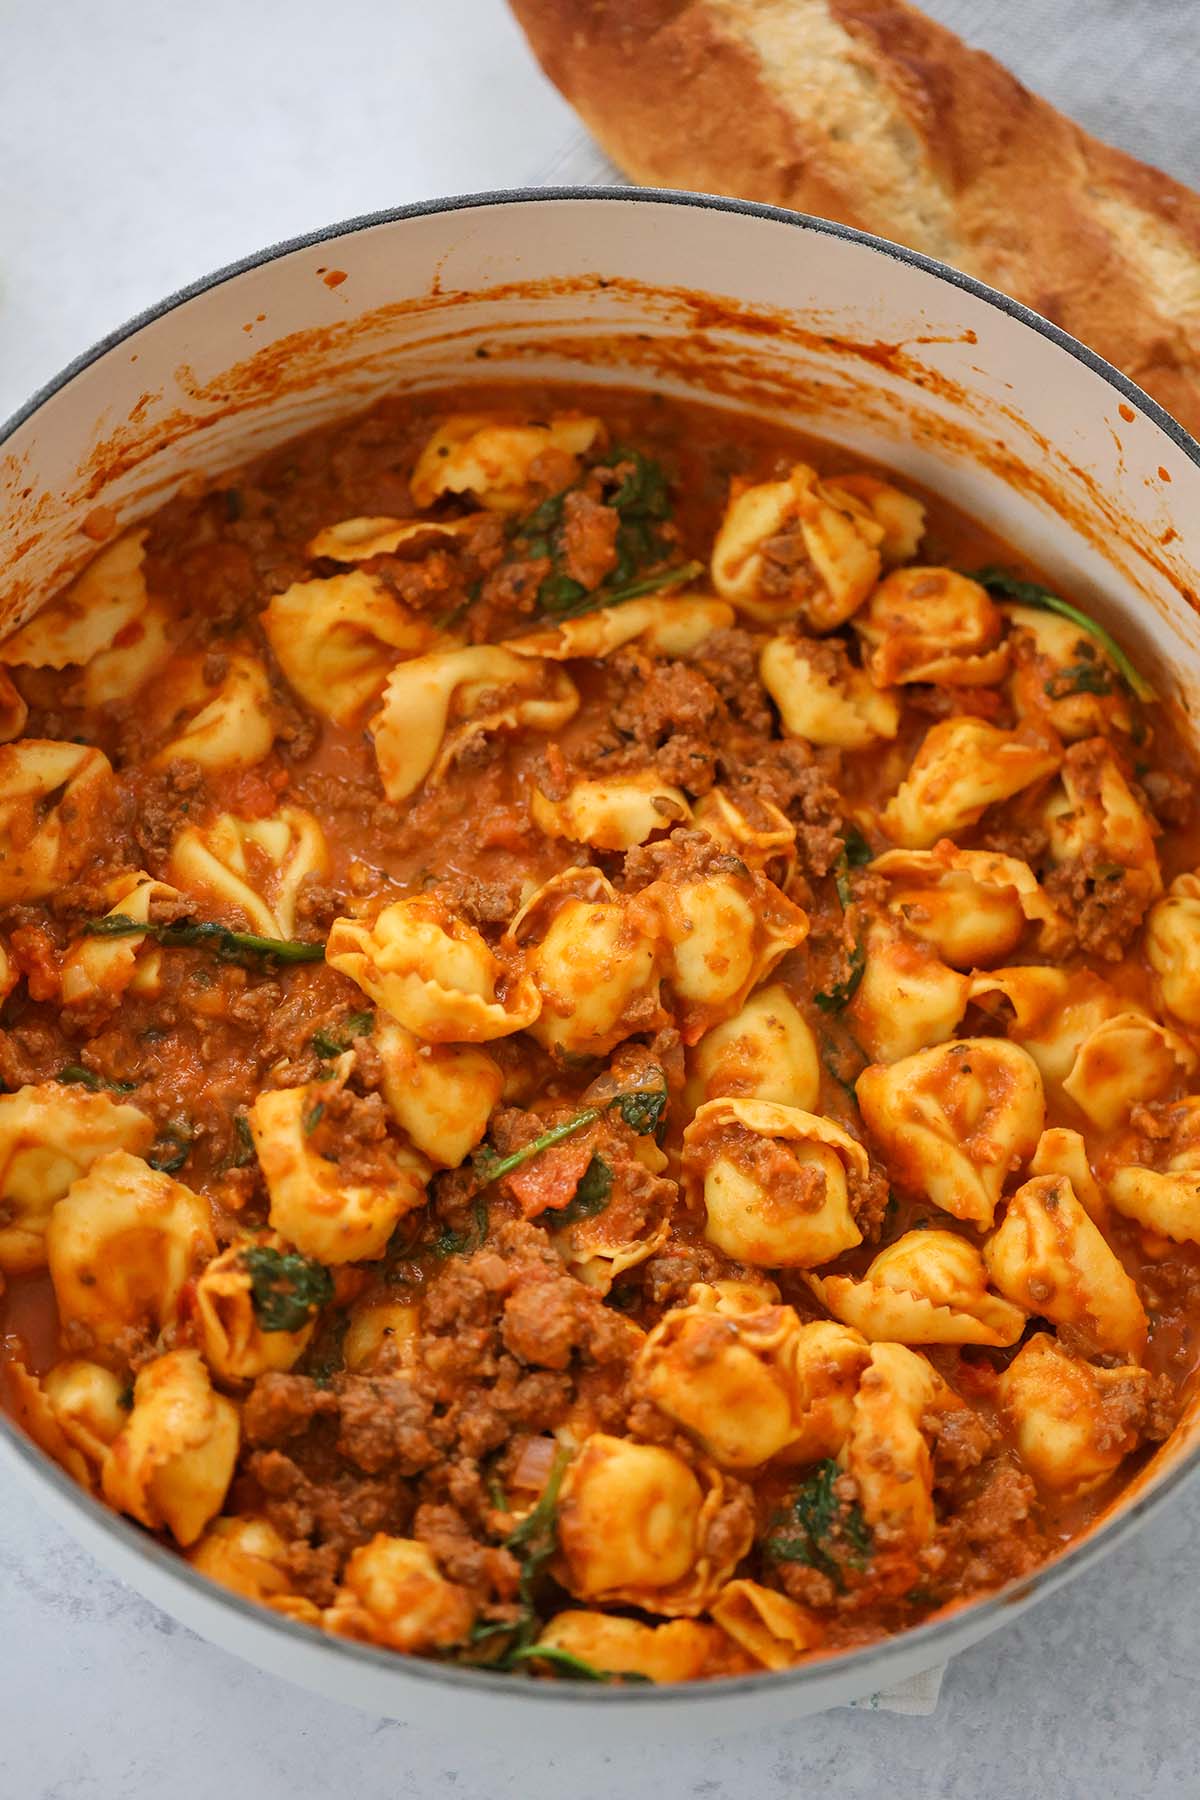 Homemade Tortellini Pasta Recipe with Meat Filling